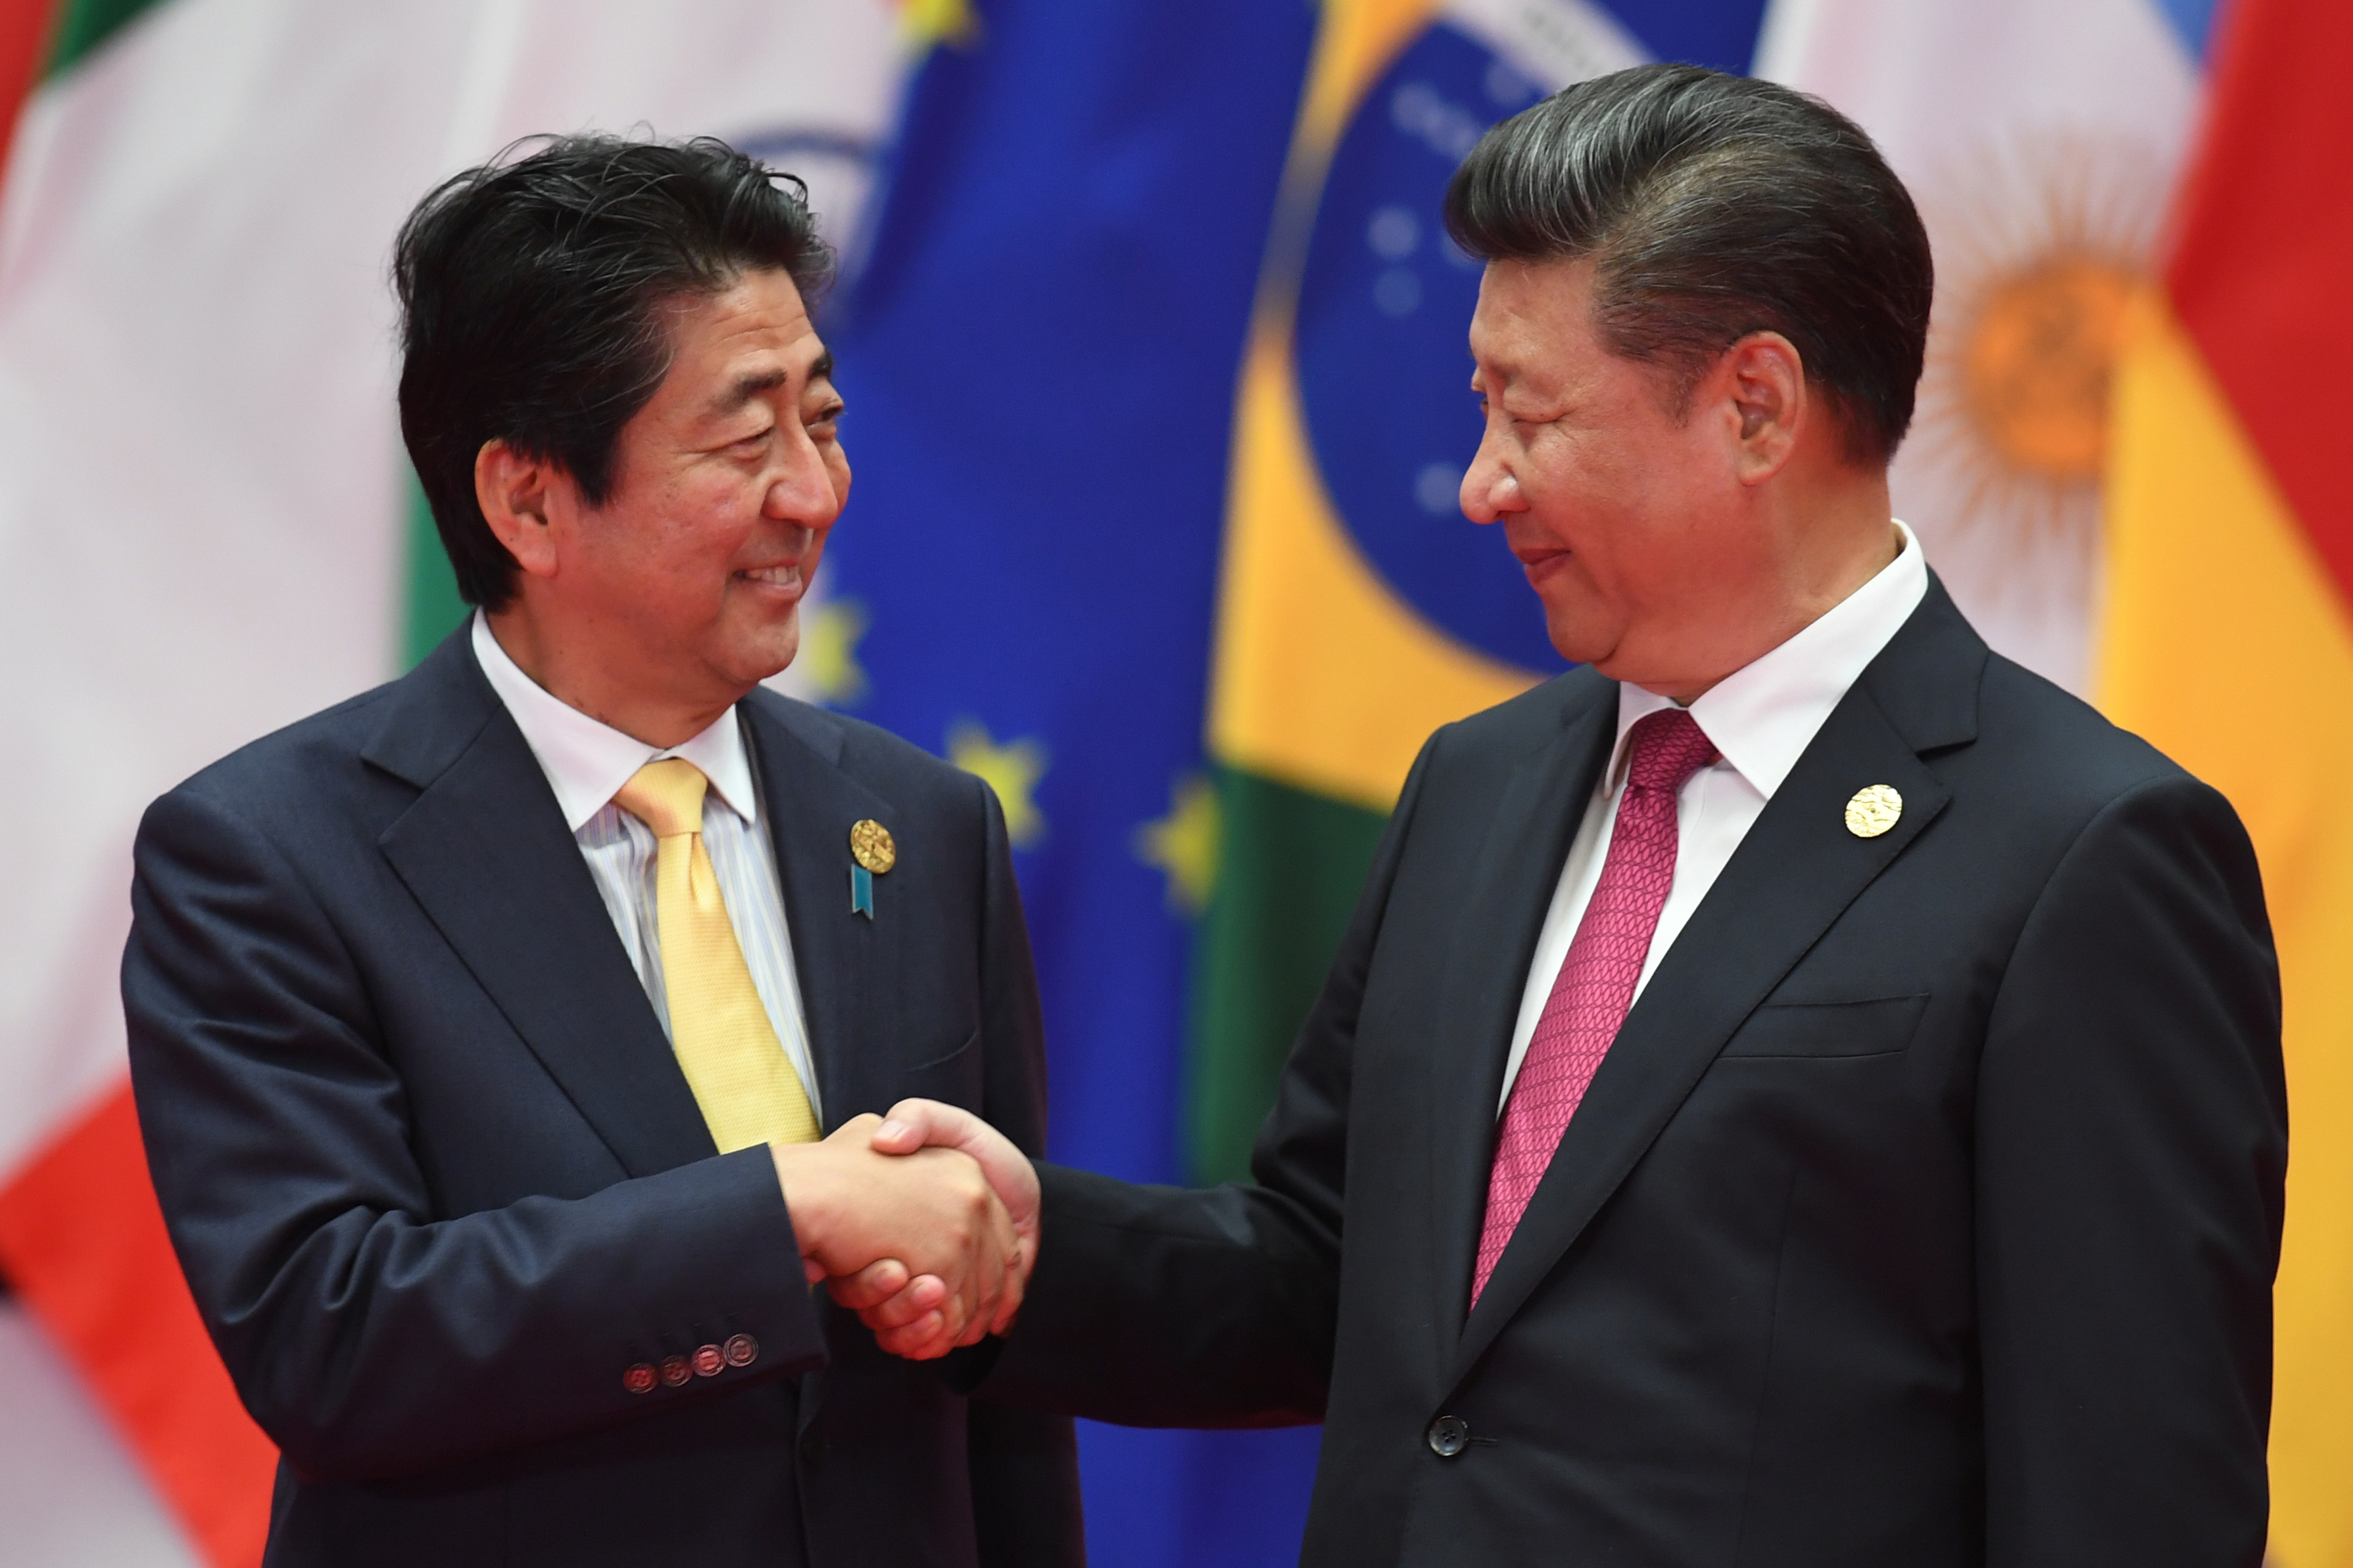 Japan's Prime Minister Shinzo Abe (L) shakes hands with China's President Xi Jinping (R) before the G20 leaders' family photo in Hangzhou on September 4, 2016. World leaders are gathering in Hangzhou for the 11th G20 Leaders Summit from September 4 to 5. / AFP PHOTO / Greg BAKER